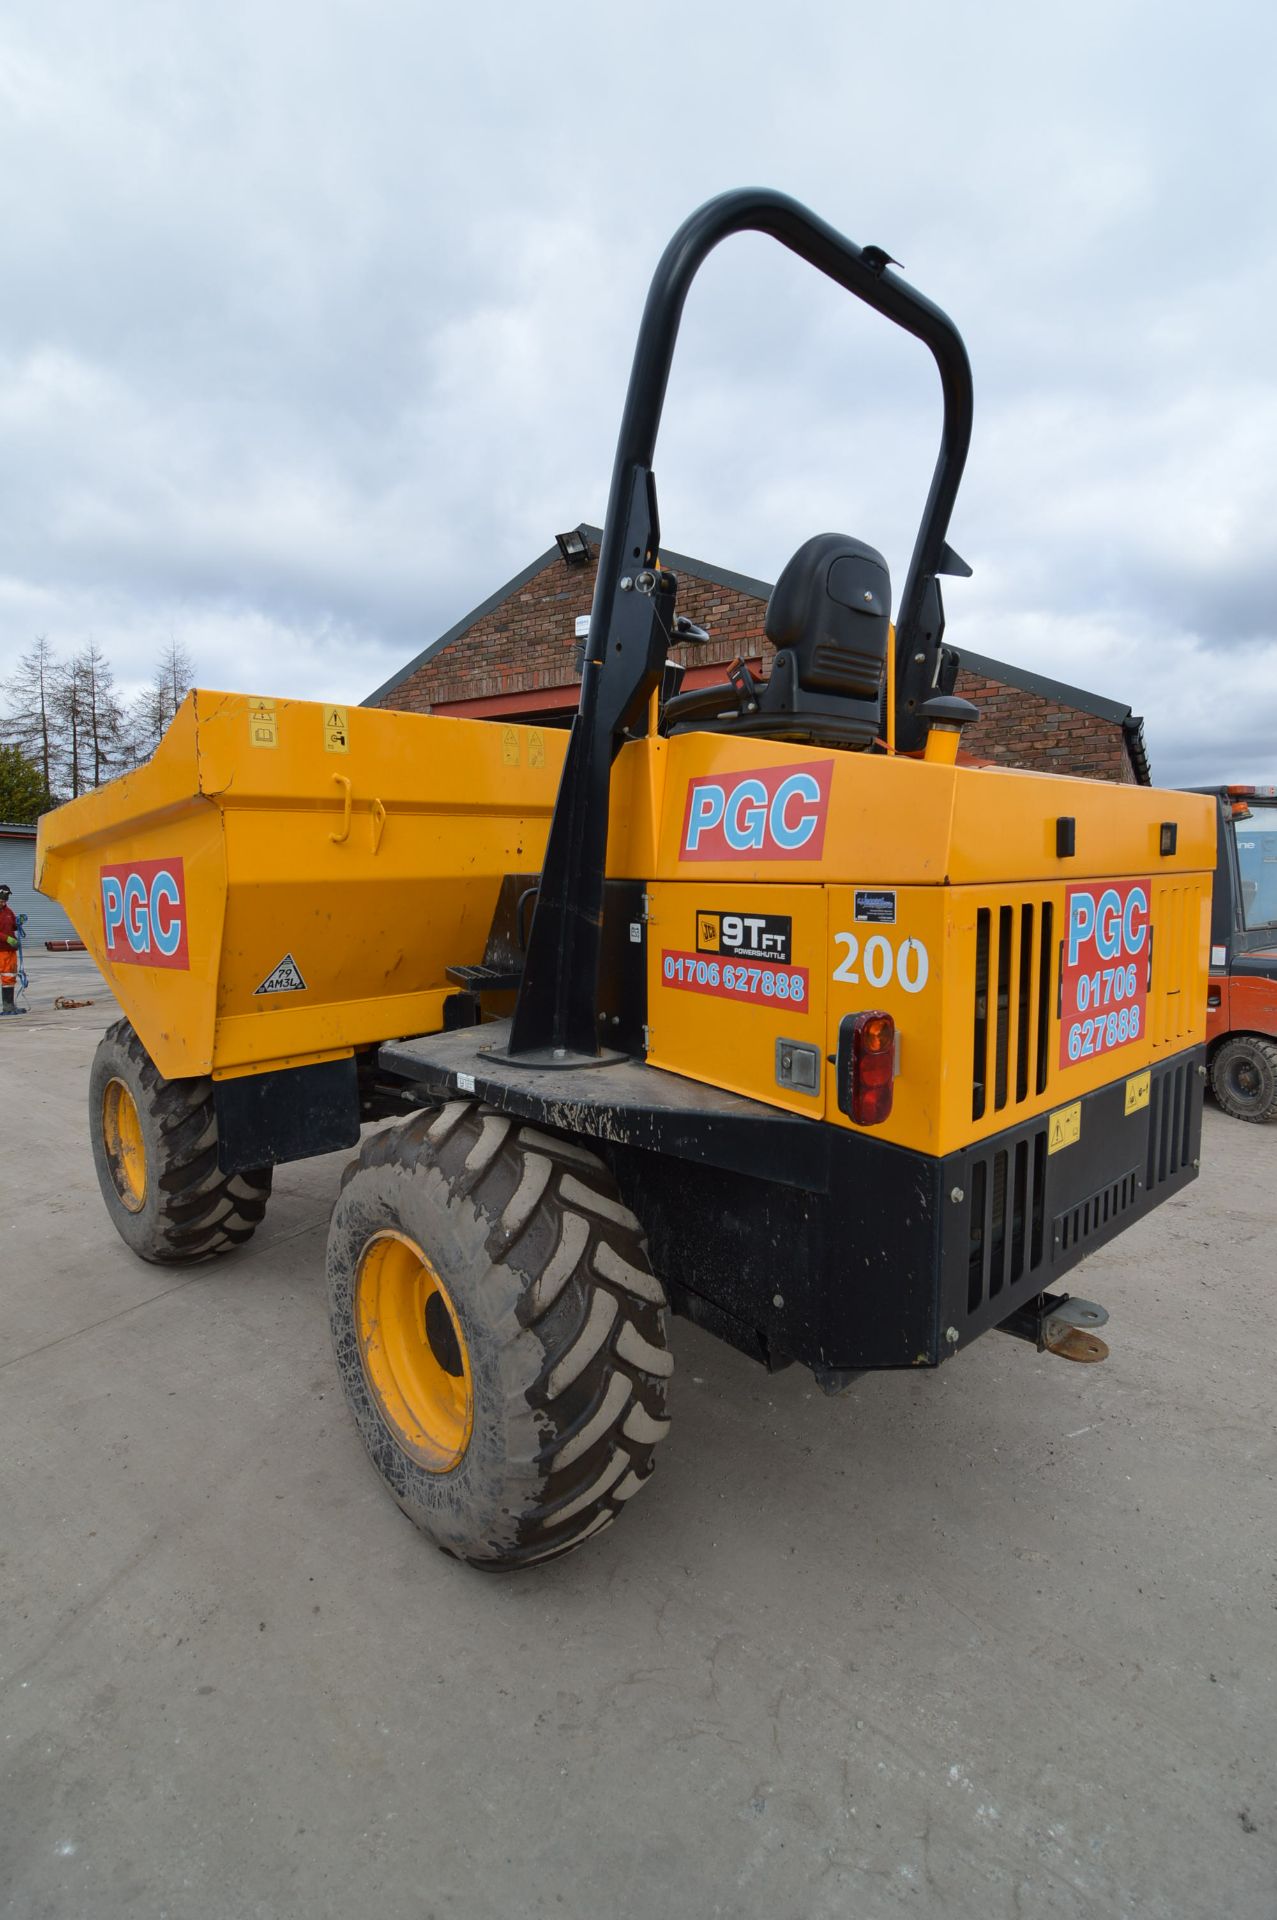 JCB 9TFT POWERSHUTTLE 4WD ARTICULATED DUMPER, serial no. SLBD1DJJEFFRM7342, year of manufacture - Image 2 of 2